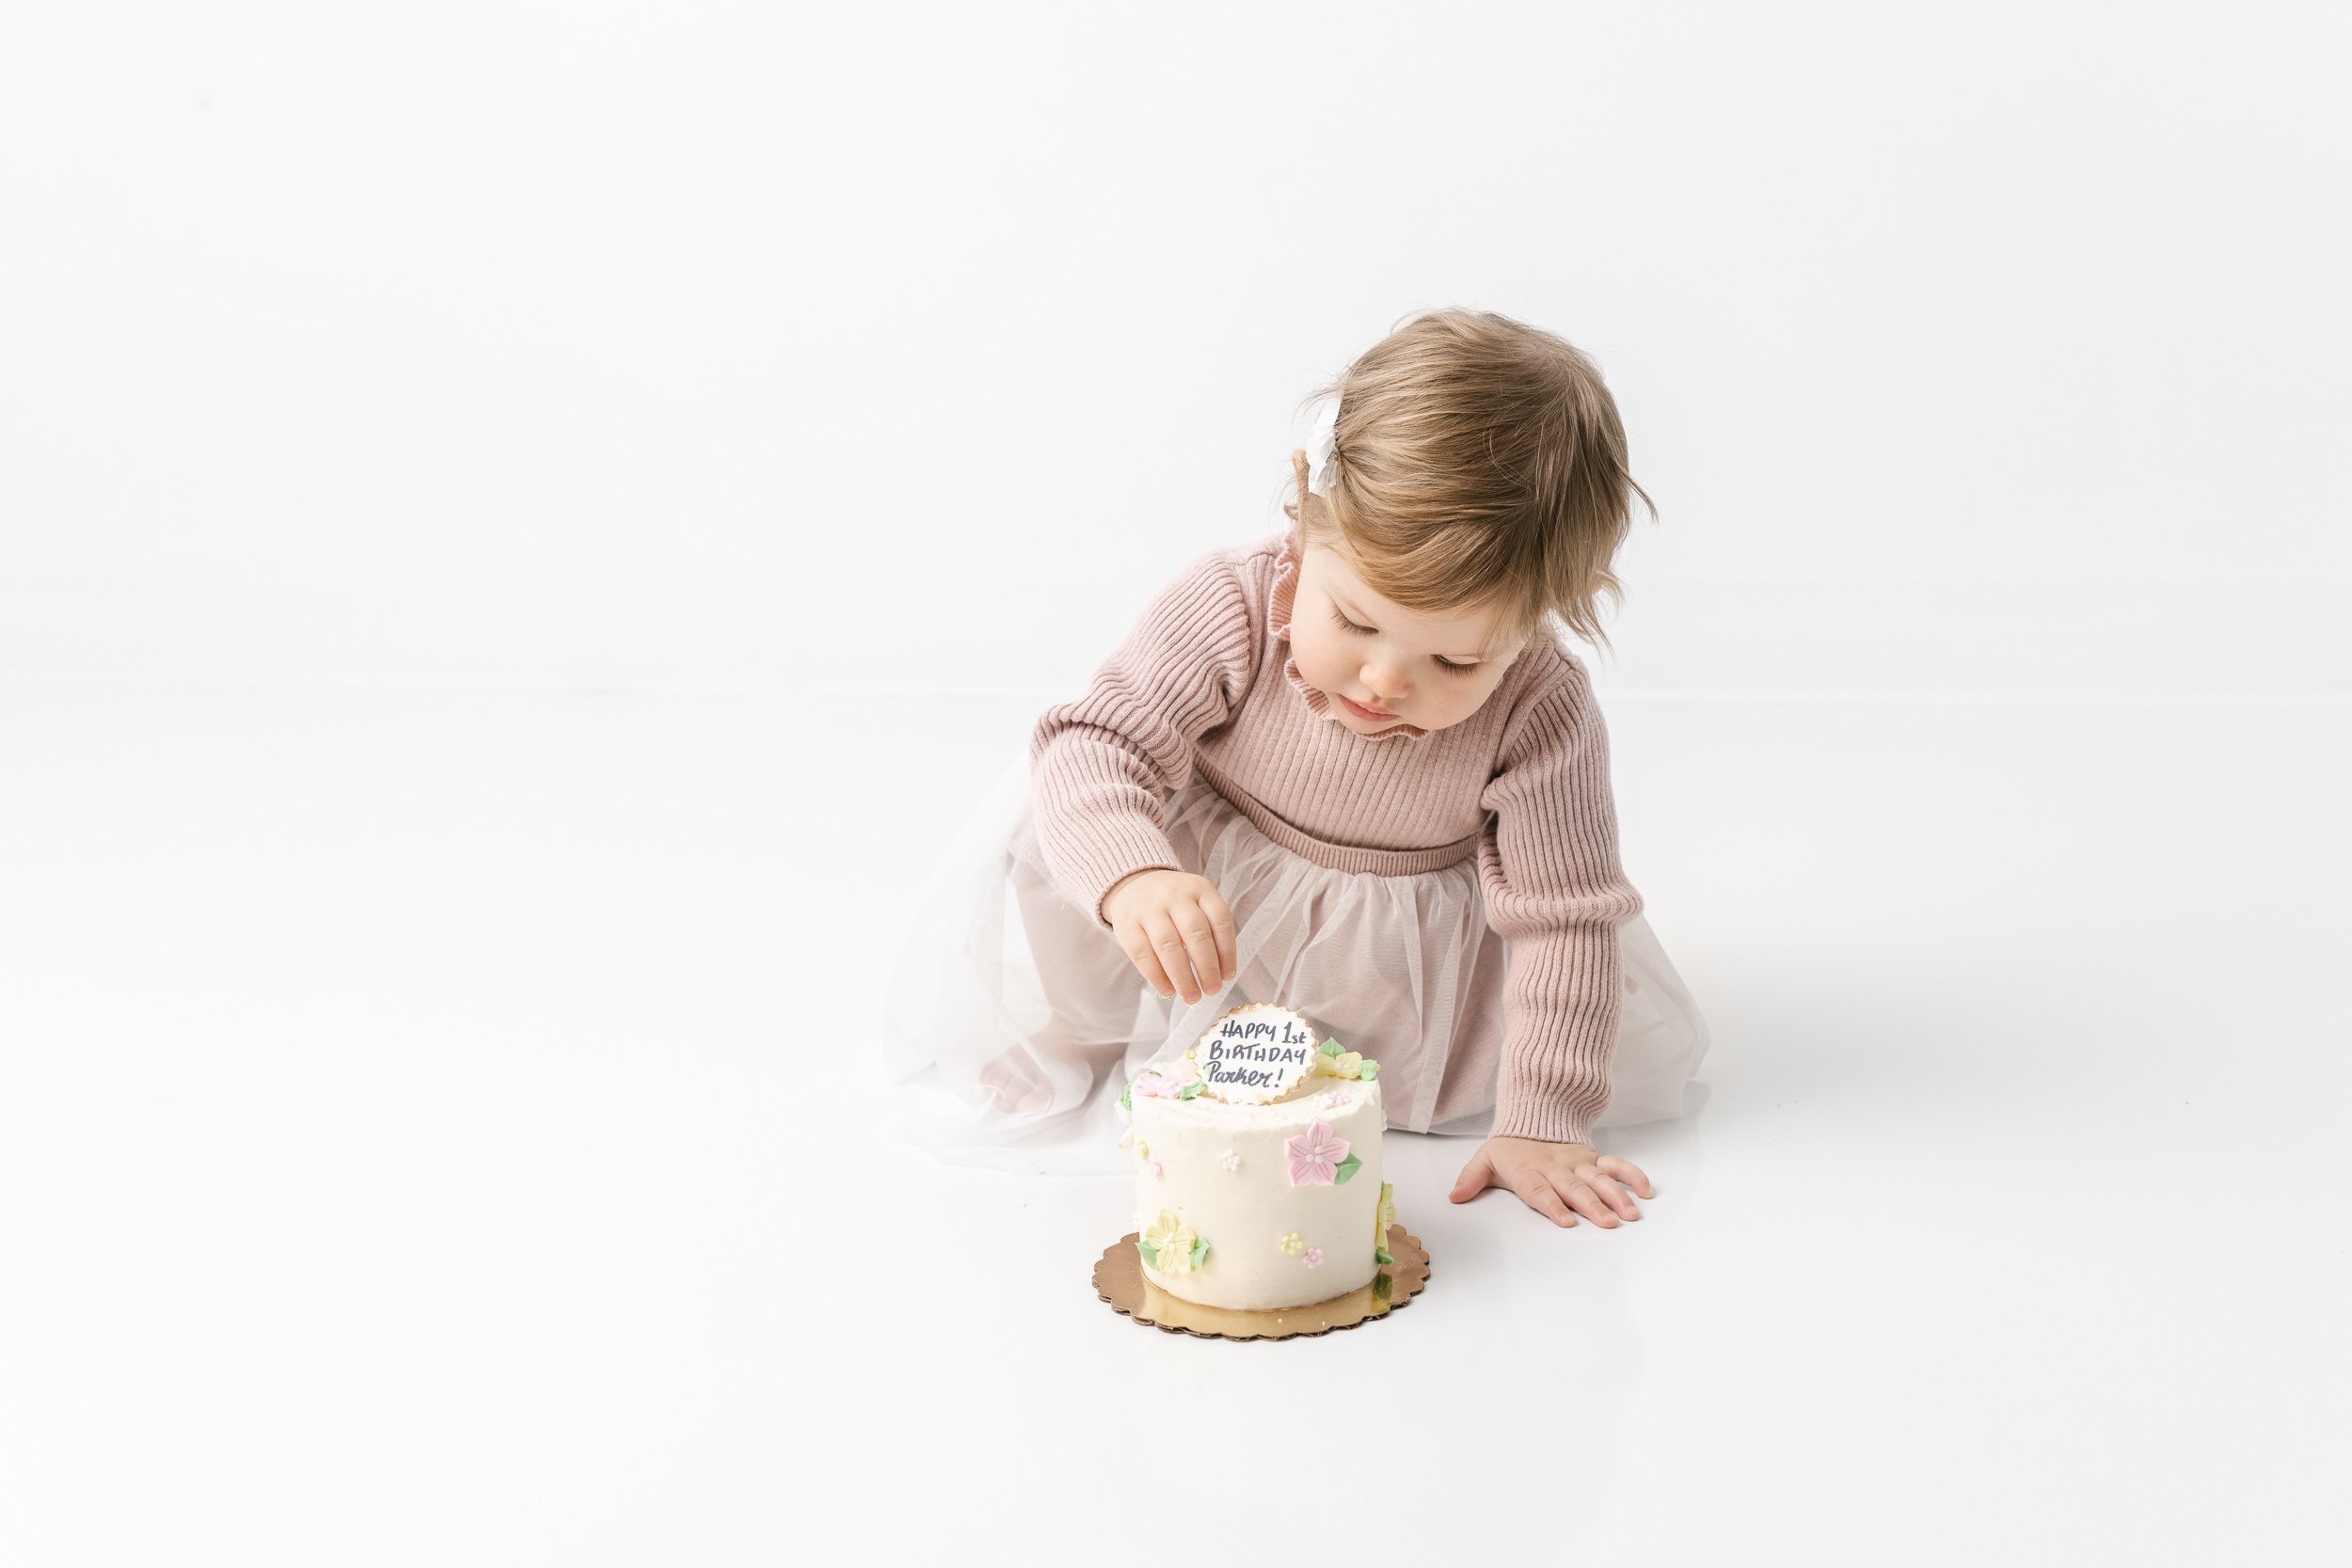  Nicole Hawkins Photography captures a baby girl touching her first birthday cake with buttercream flowers. floral birthday cake #NicoleHawkinsPhotography #NicoleHawkinsBabies #studiochildren #firstbirthday #studiophotography #girlsbirthdayportraits 